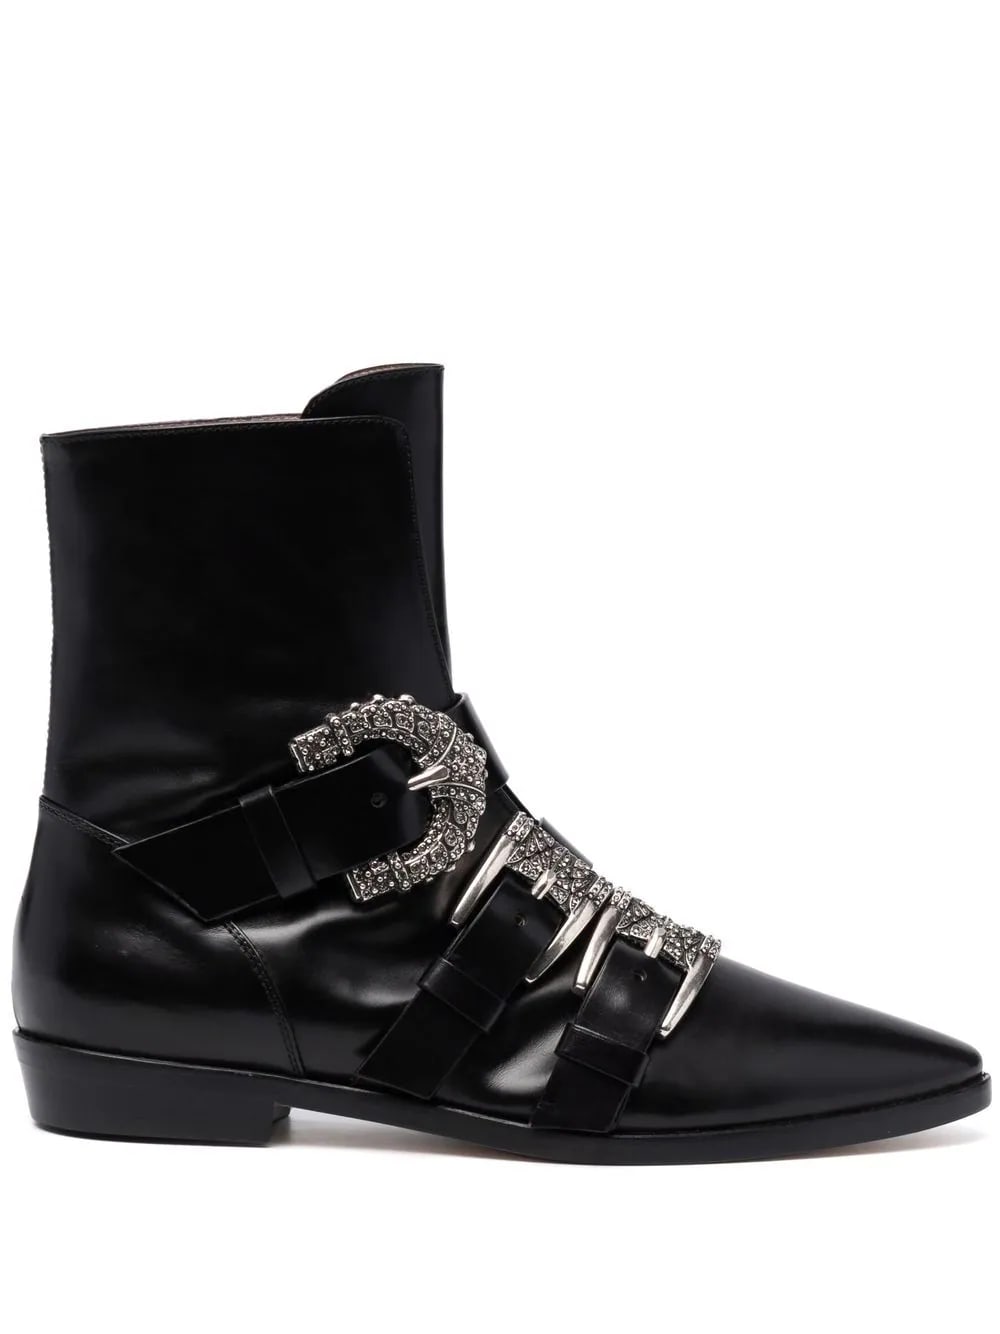 Etro Woman Black Ankle Boot With Jewel Buckles